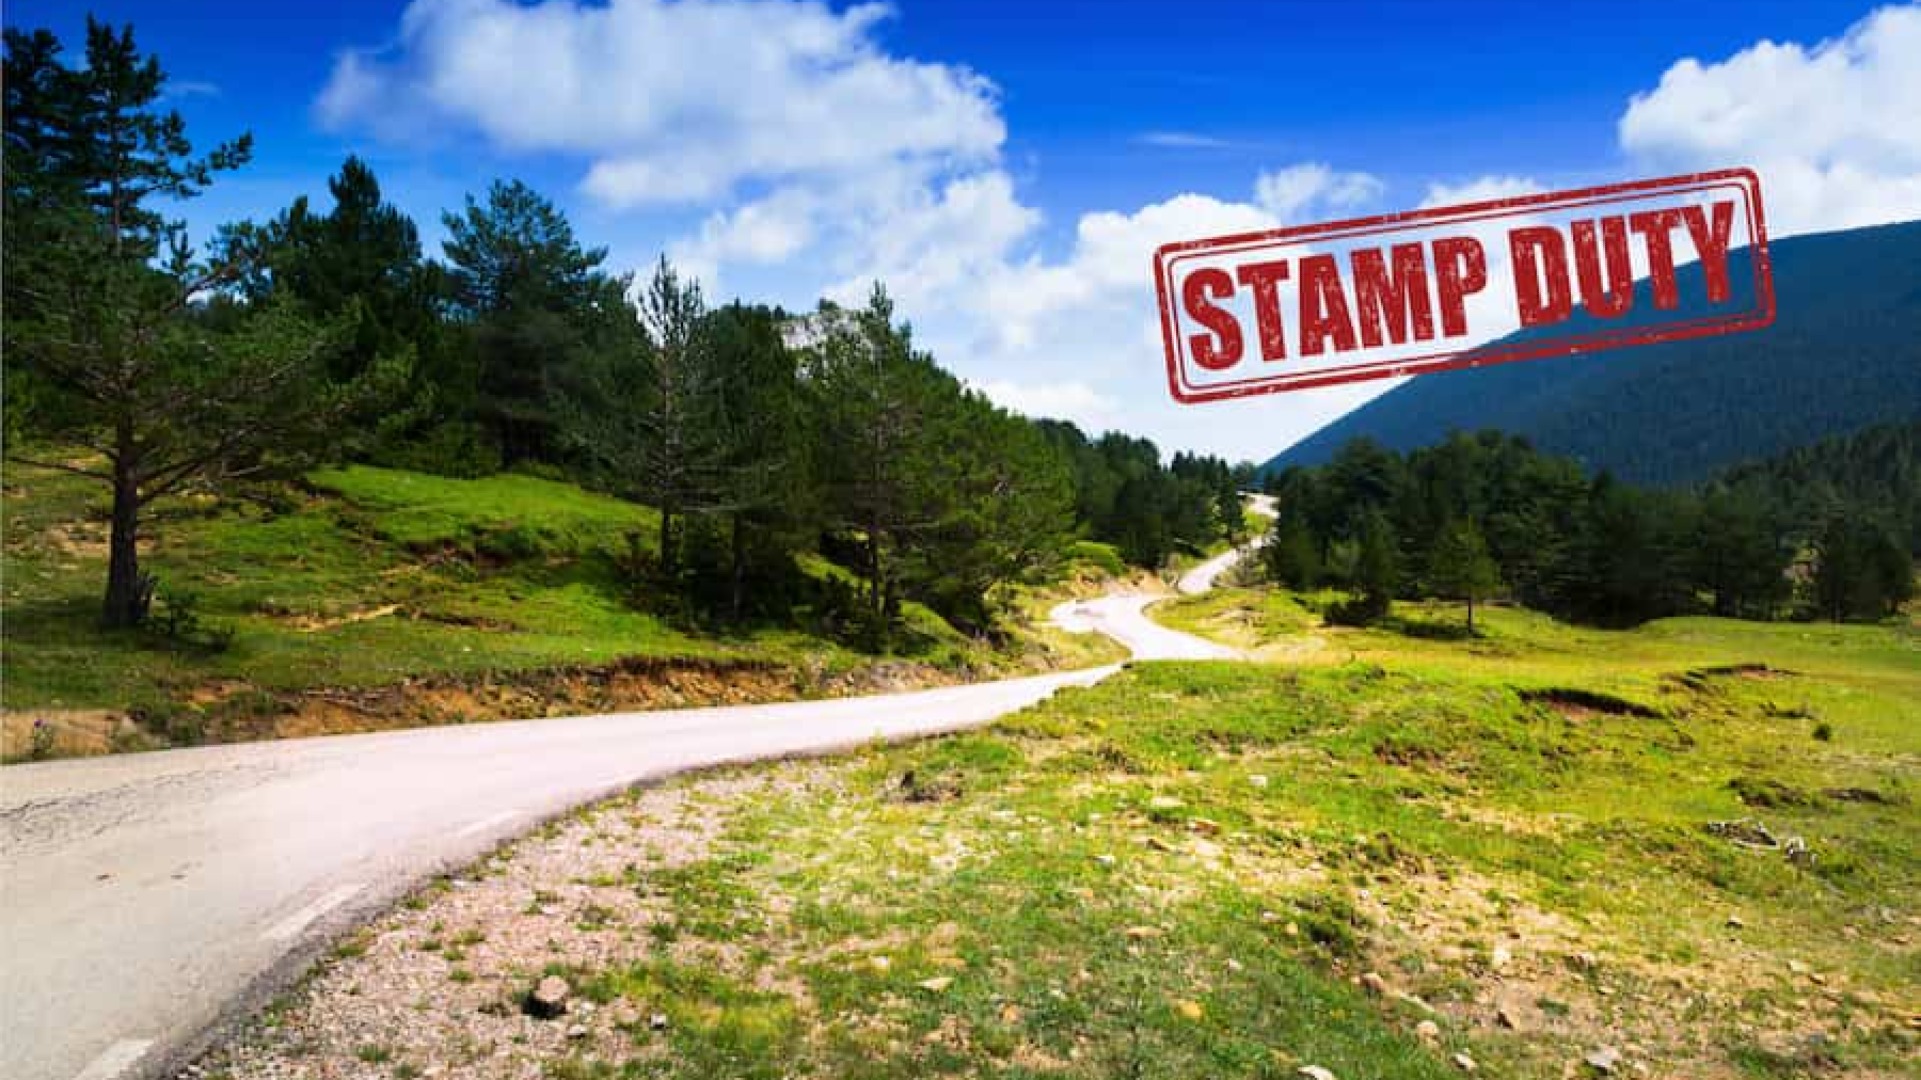 Increase of Stamp Duty Costs on Transfers of Gazetted Out of Town Areas